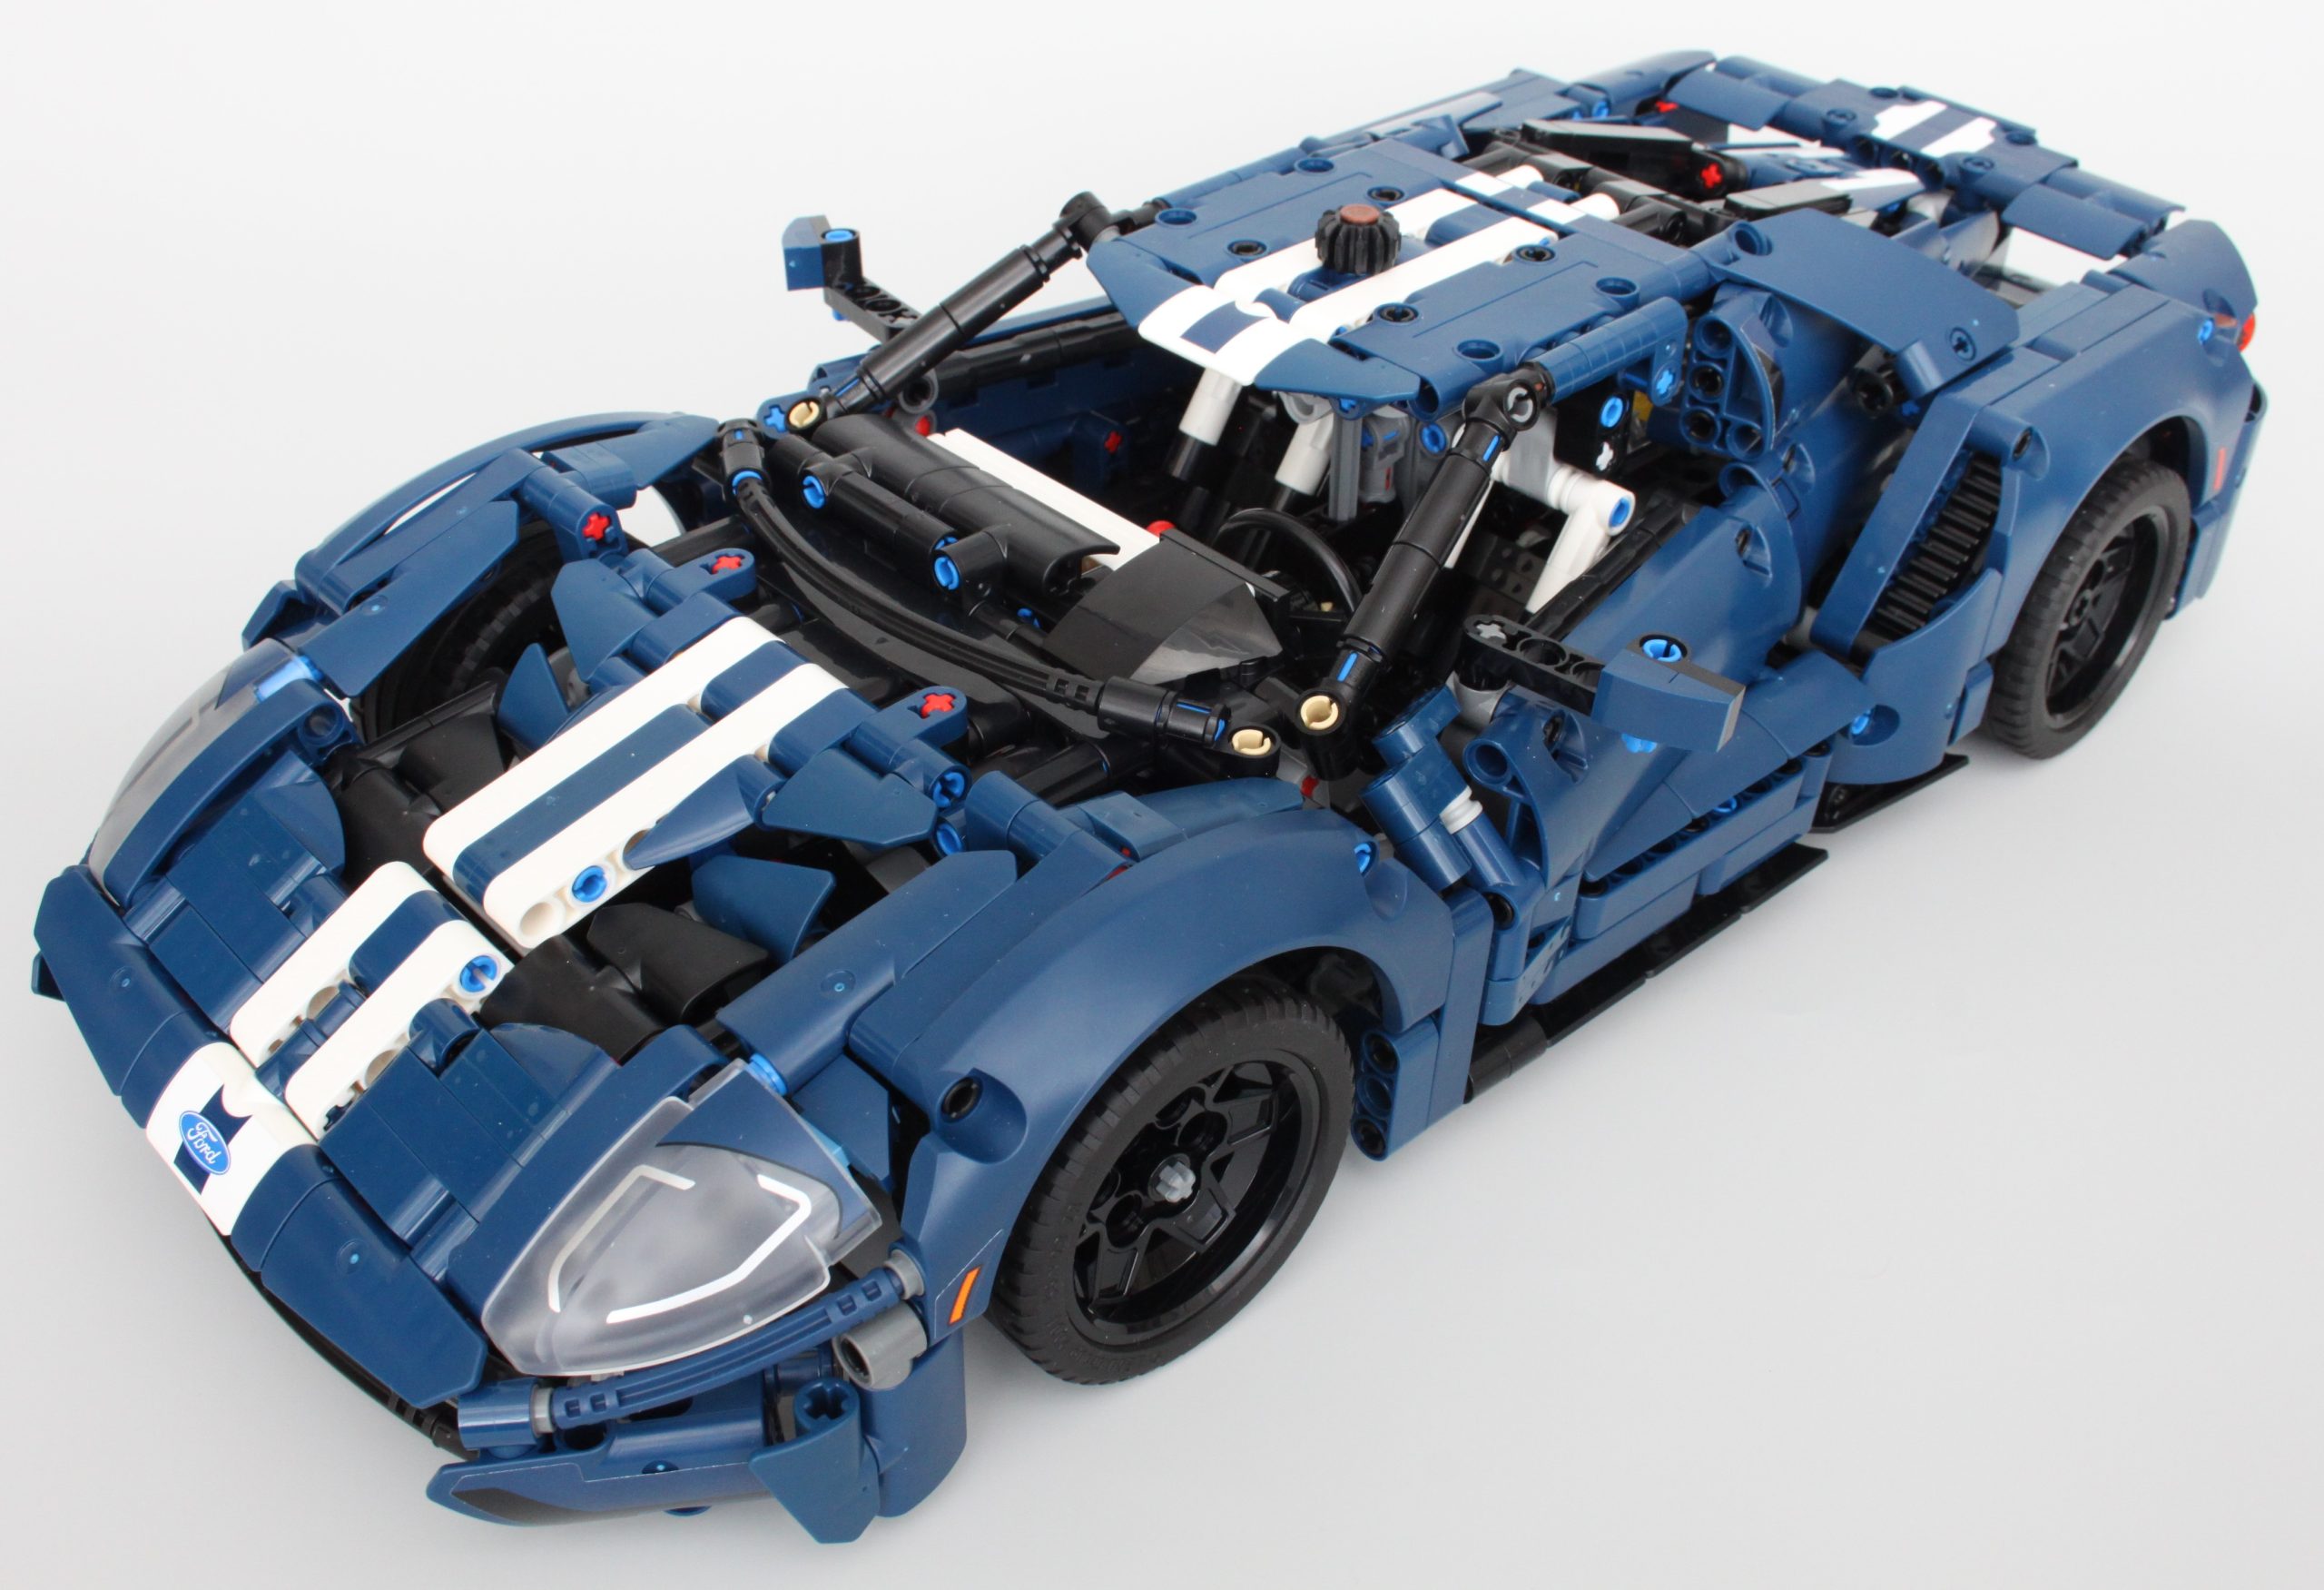 LEGO Technic 42154 Ford GT, Set Preview